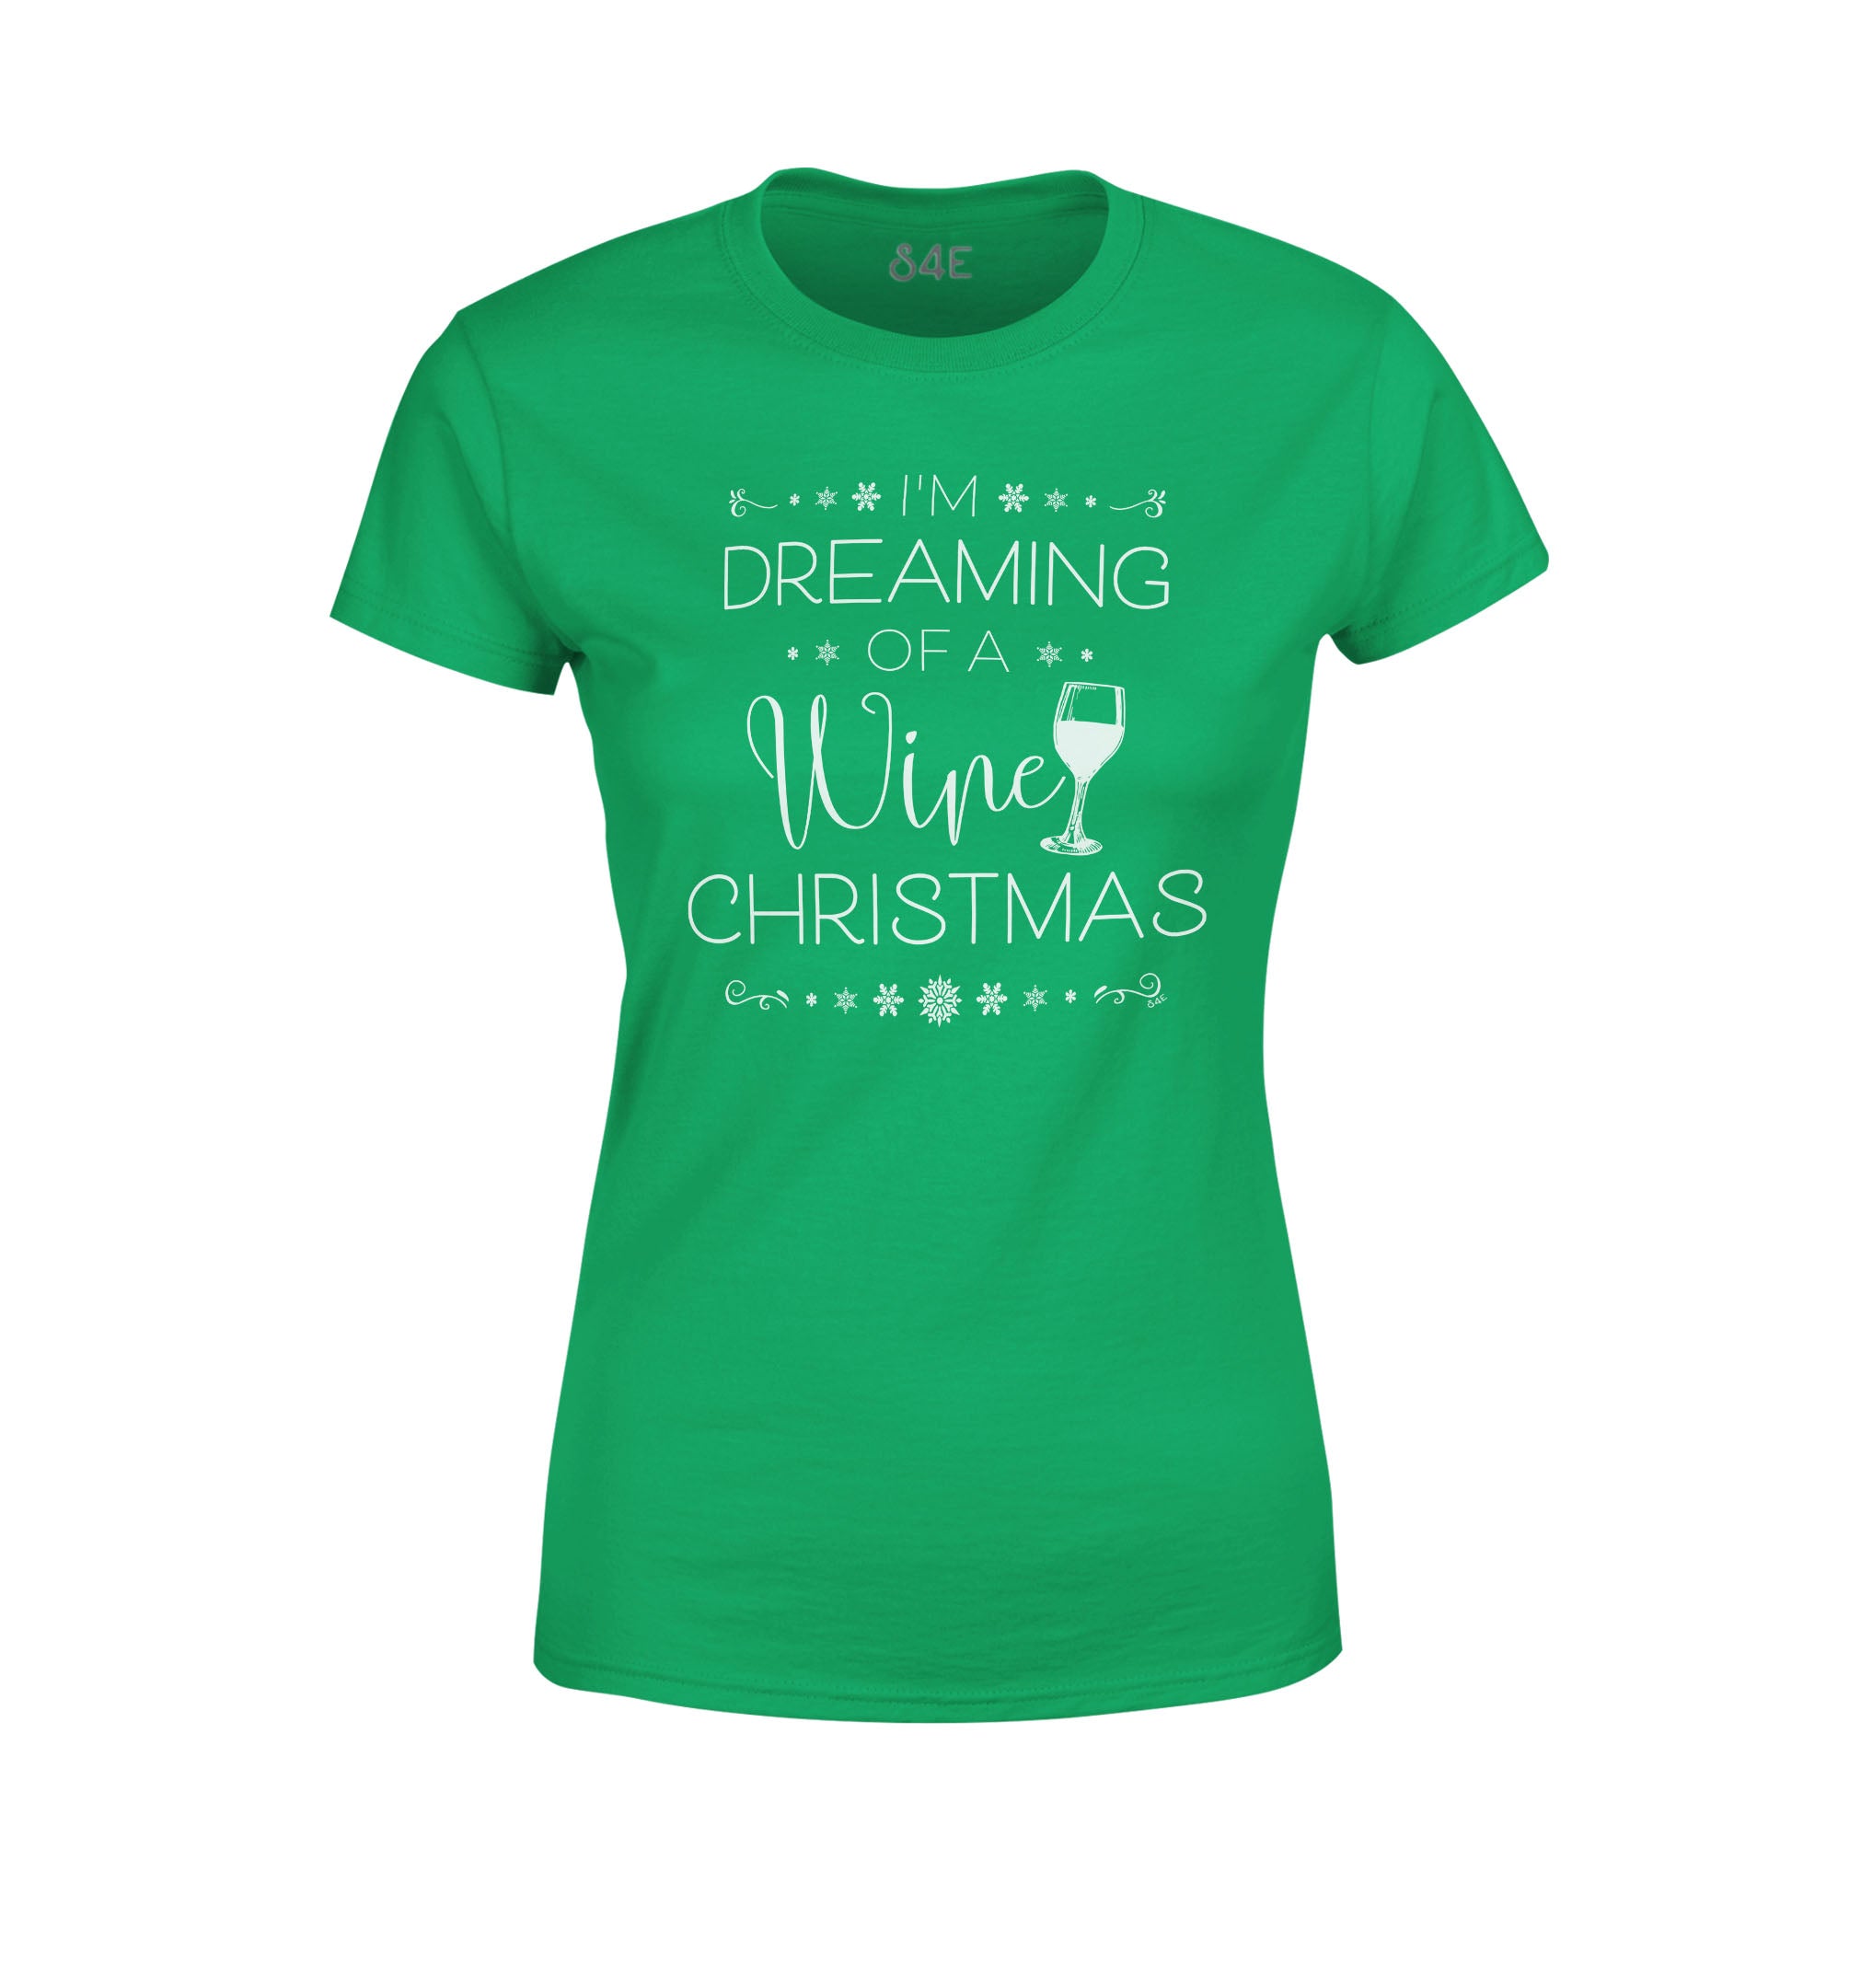 I'm Dreaming of a Wine Christmas Women's T-Shirt